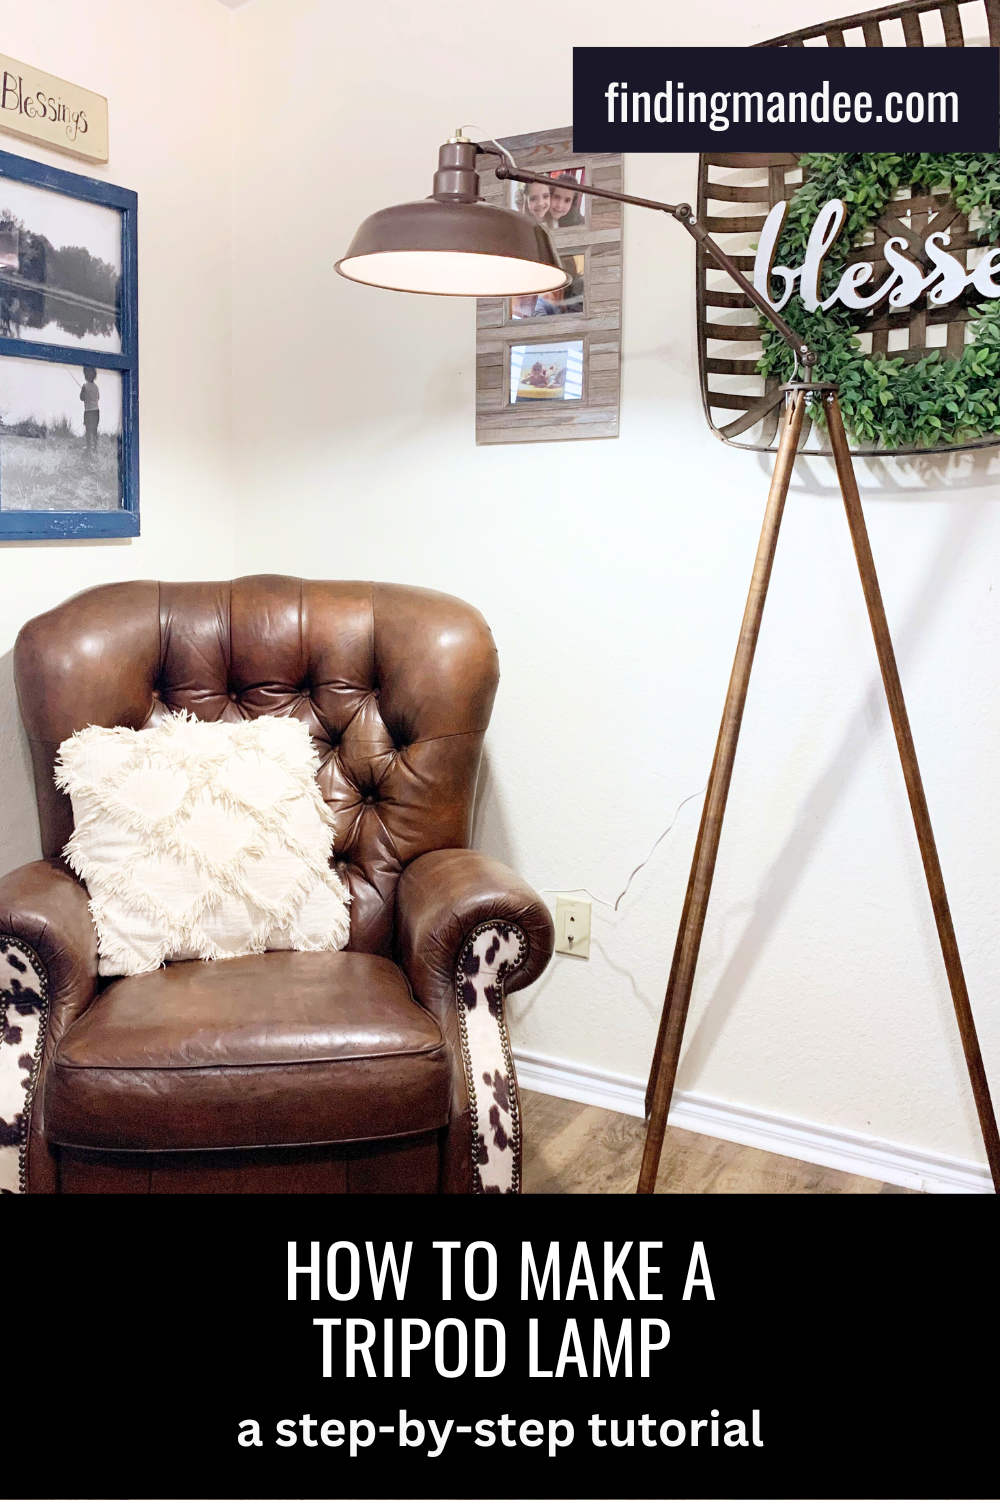 How to Make a Tripod Lamp: a Step-by-Step Tutorial | Finding Mandee